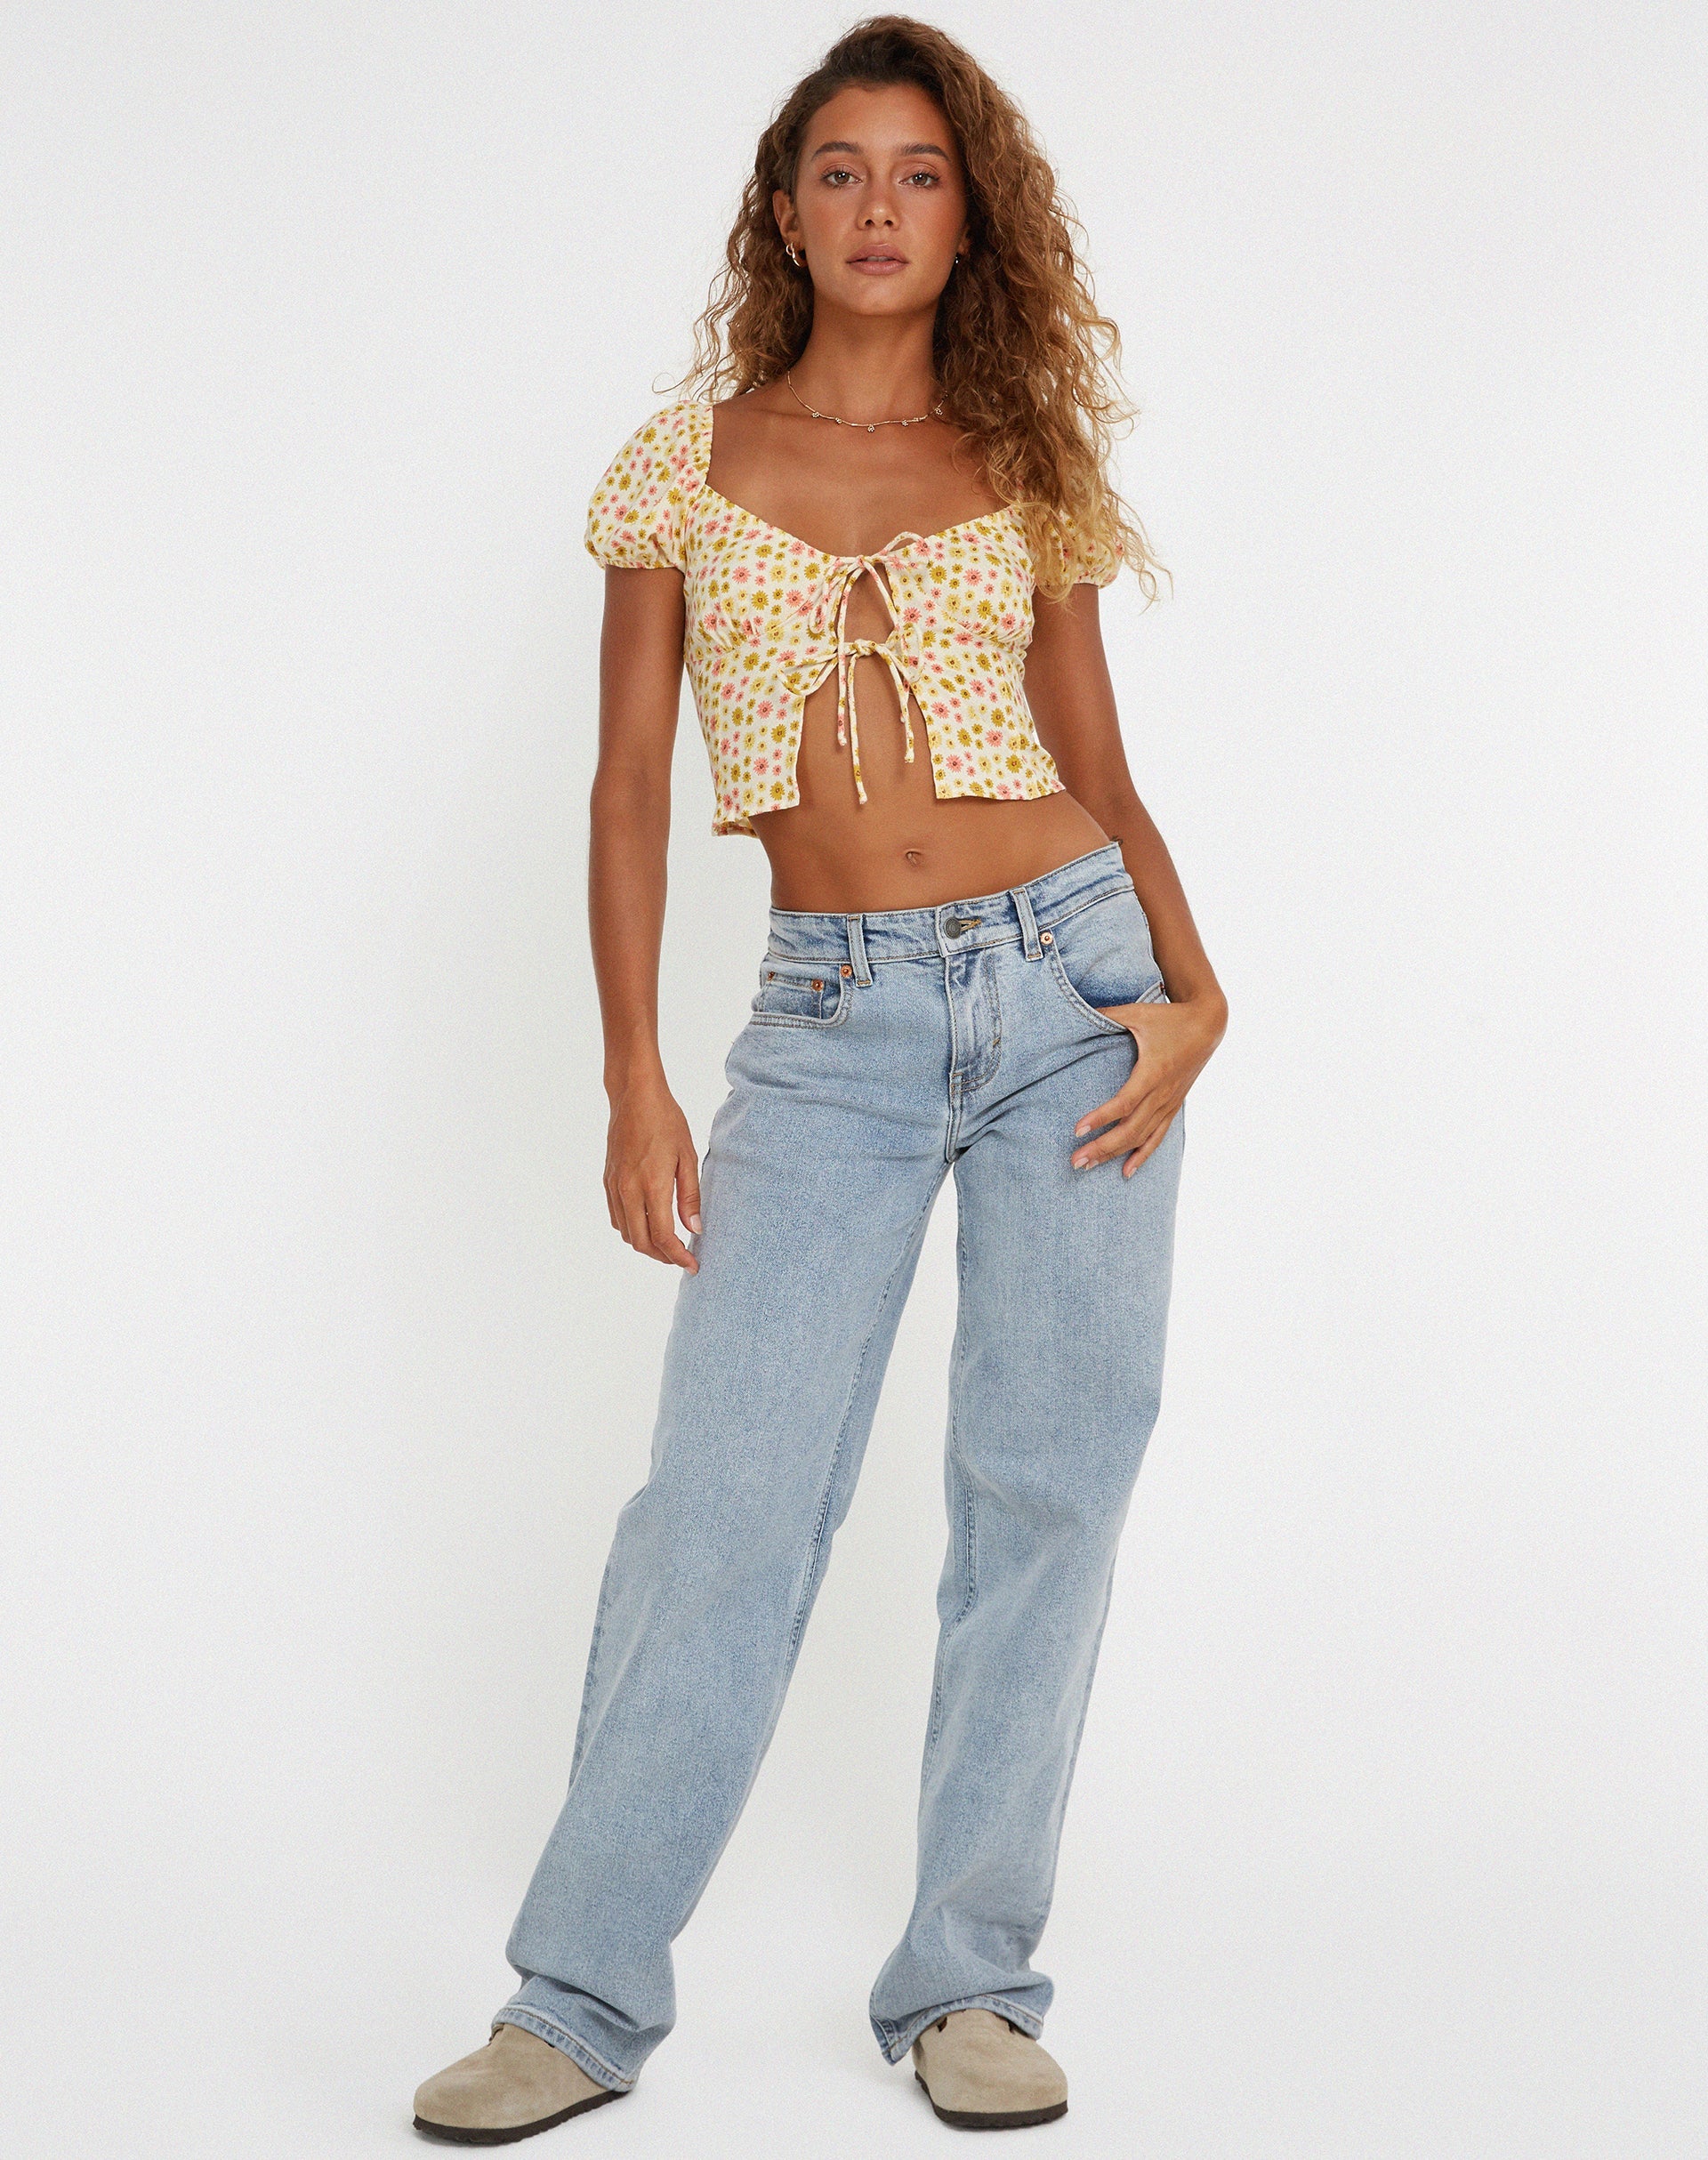 image of Rom Top in Daisy Chain Cream